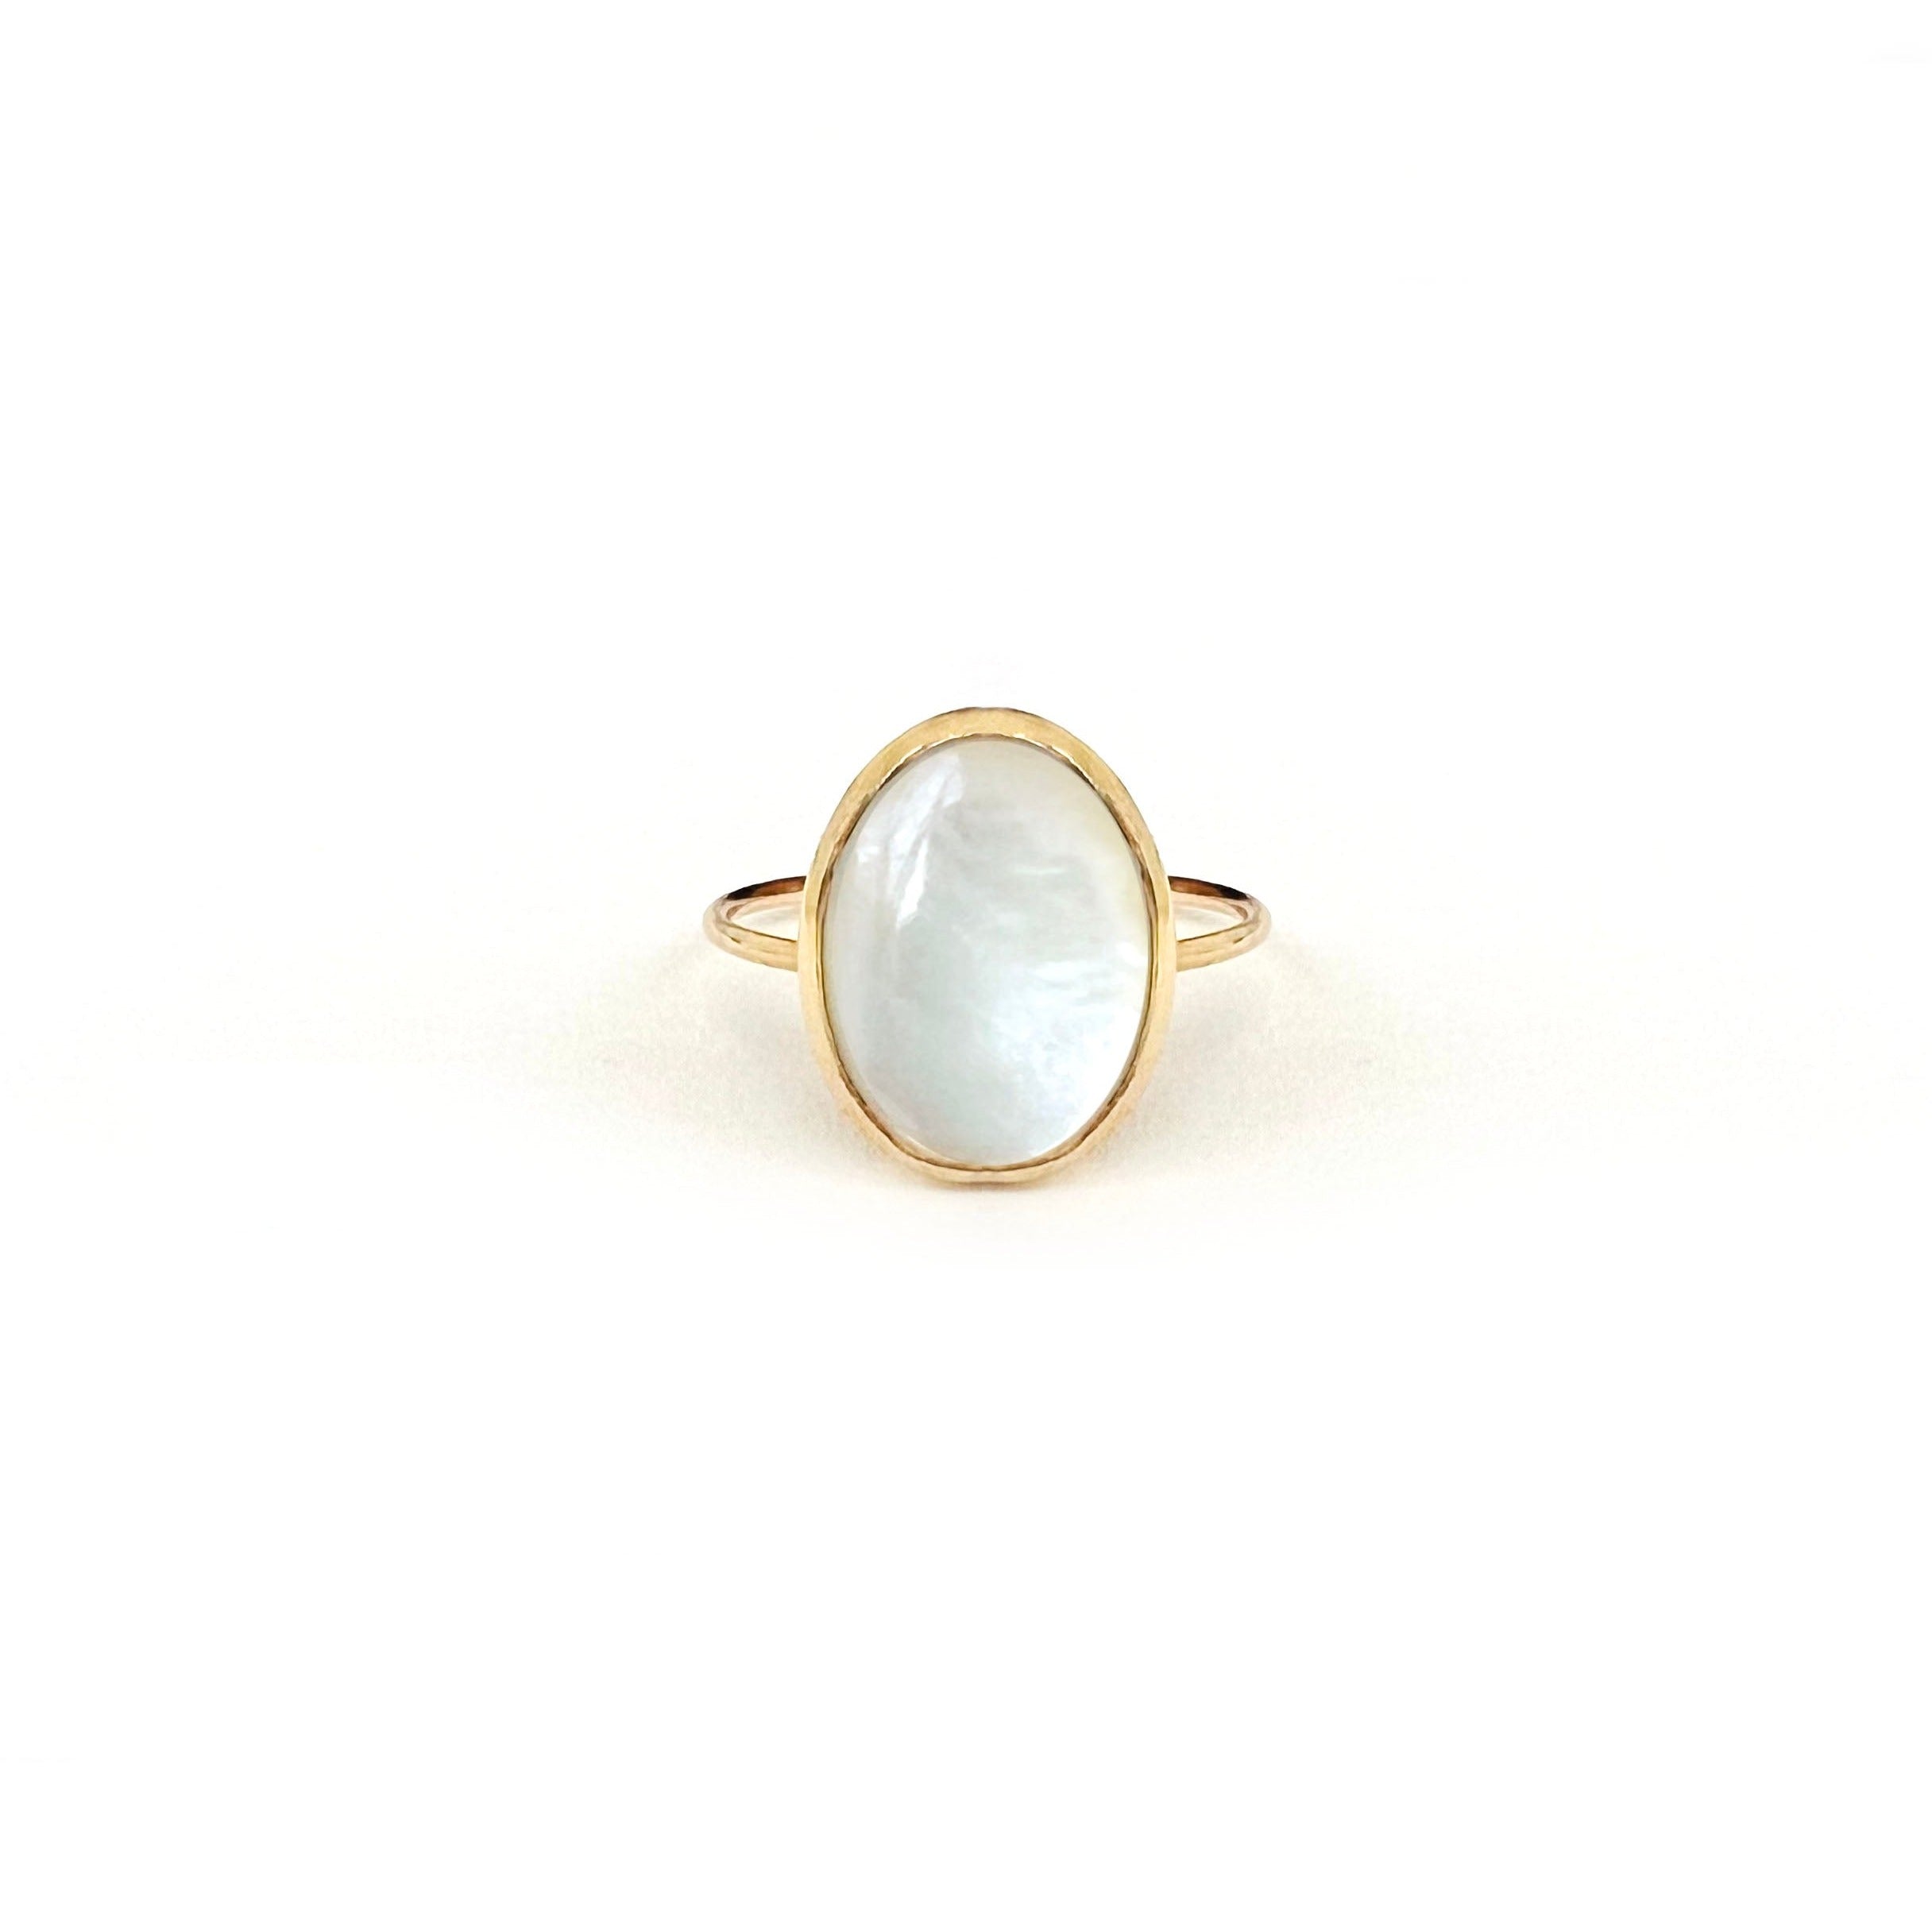 White large oval pearl ring with recycled gold